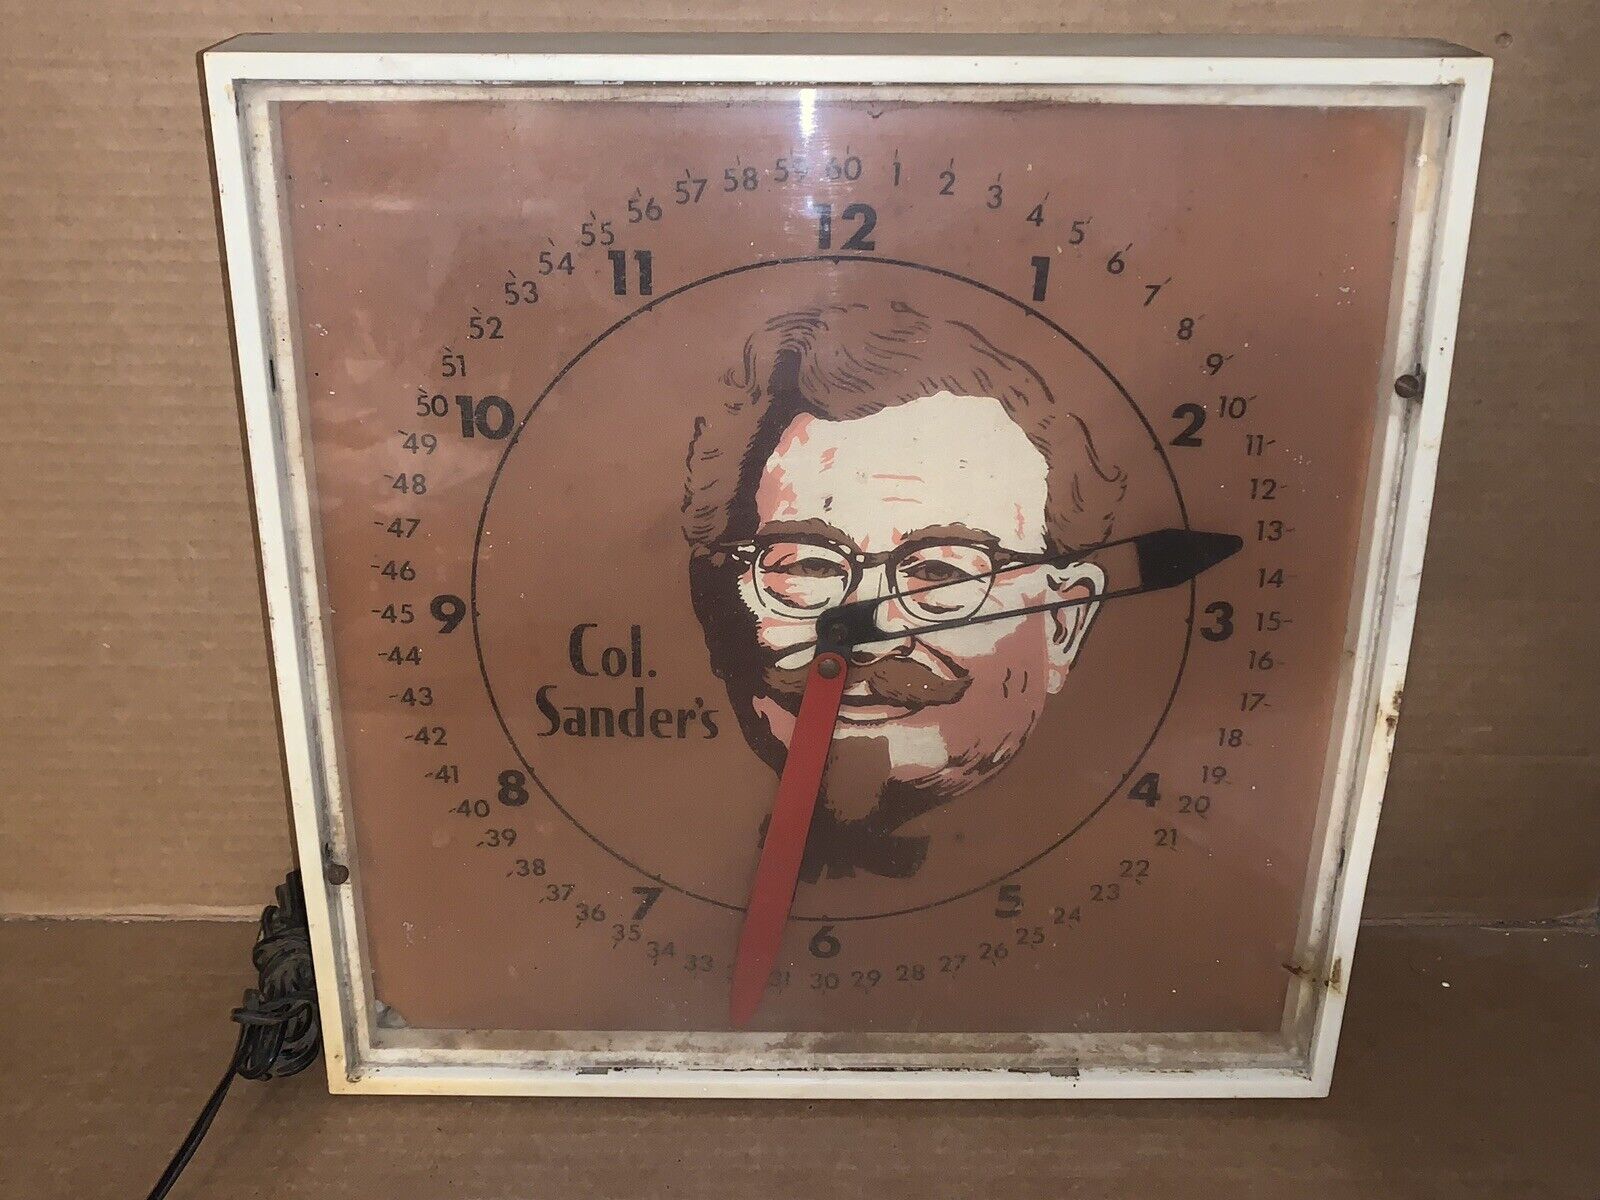 Extremely Rare Vintage Colonel Sanders Kentucky Fried Chicken Advertising Clock